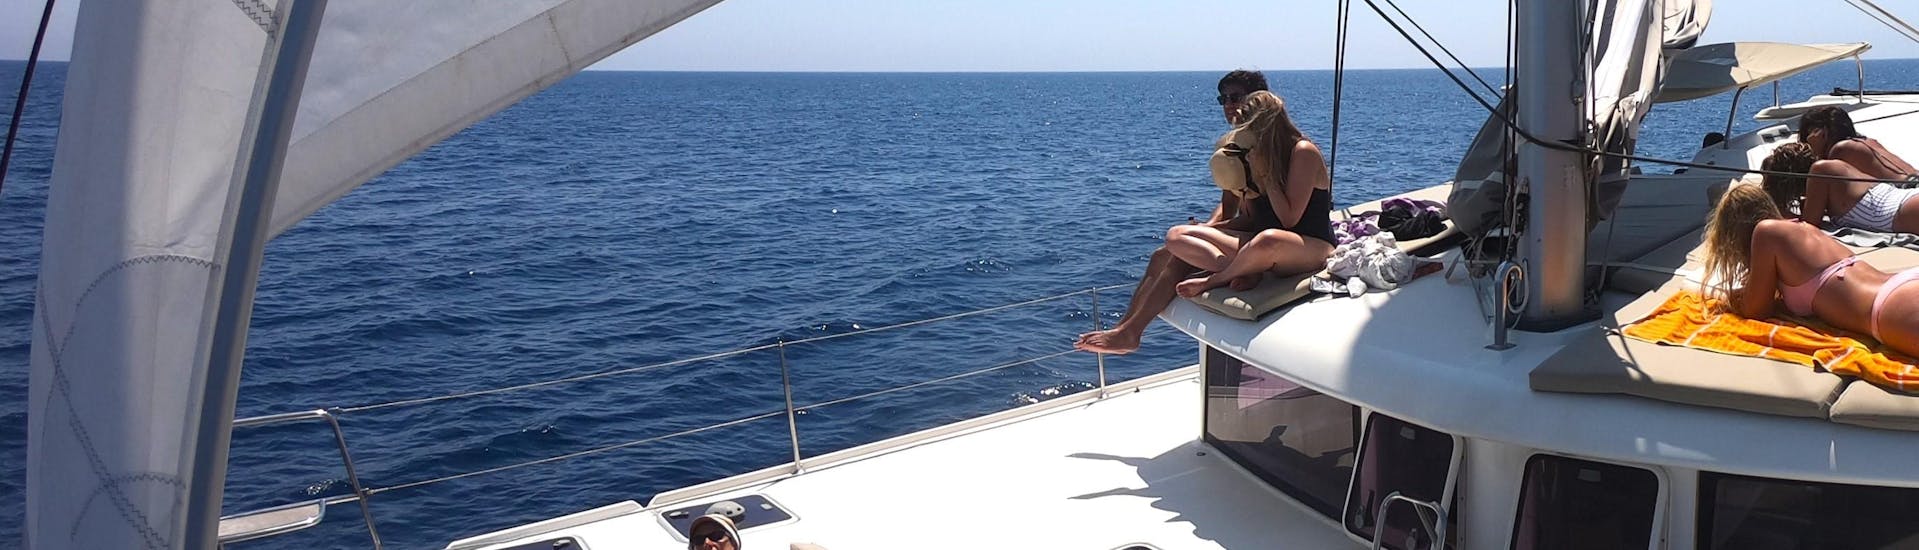 Some participants are enjoying the sun during a catamaran trip with All Sailing Alghero.